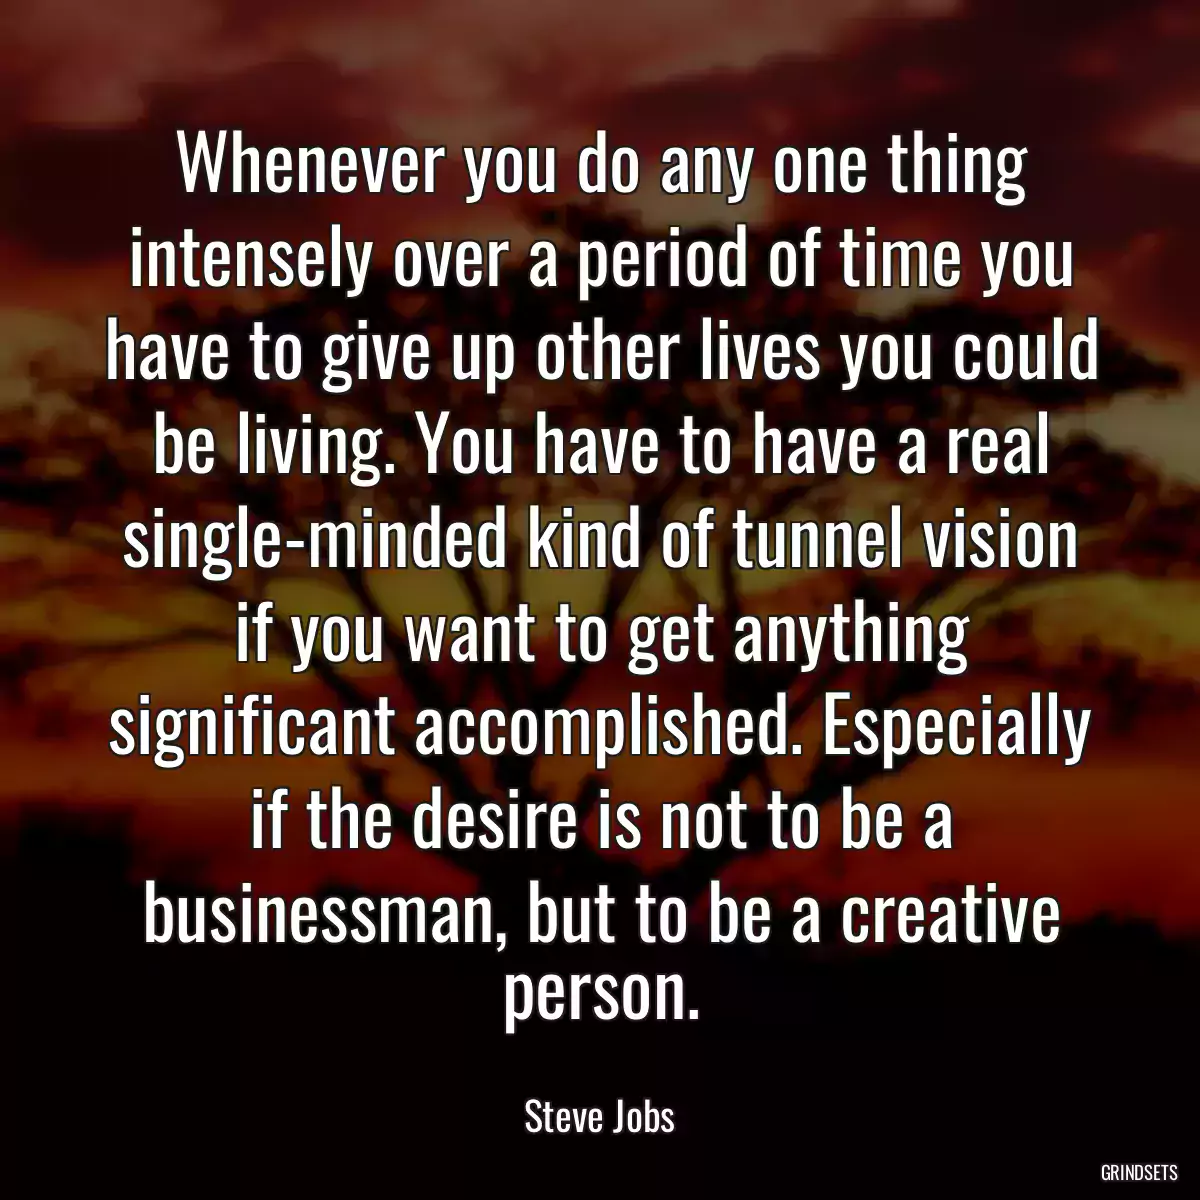 Whenever you do any one thing intensely over a period of time you have to give up other lives you could be living. You have to have a real single-minded kind of tunnel vision if you want to get anything significant accomplished. Especially if the desire is not to be a businessman, but to be a creative person.